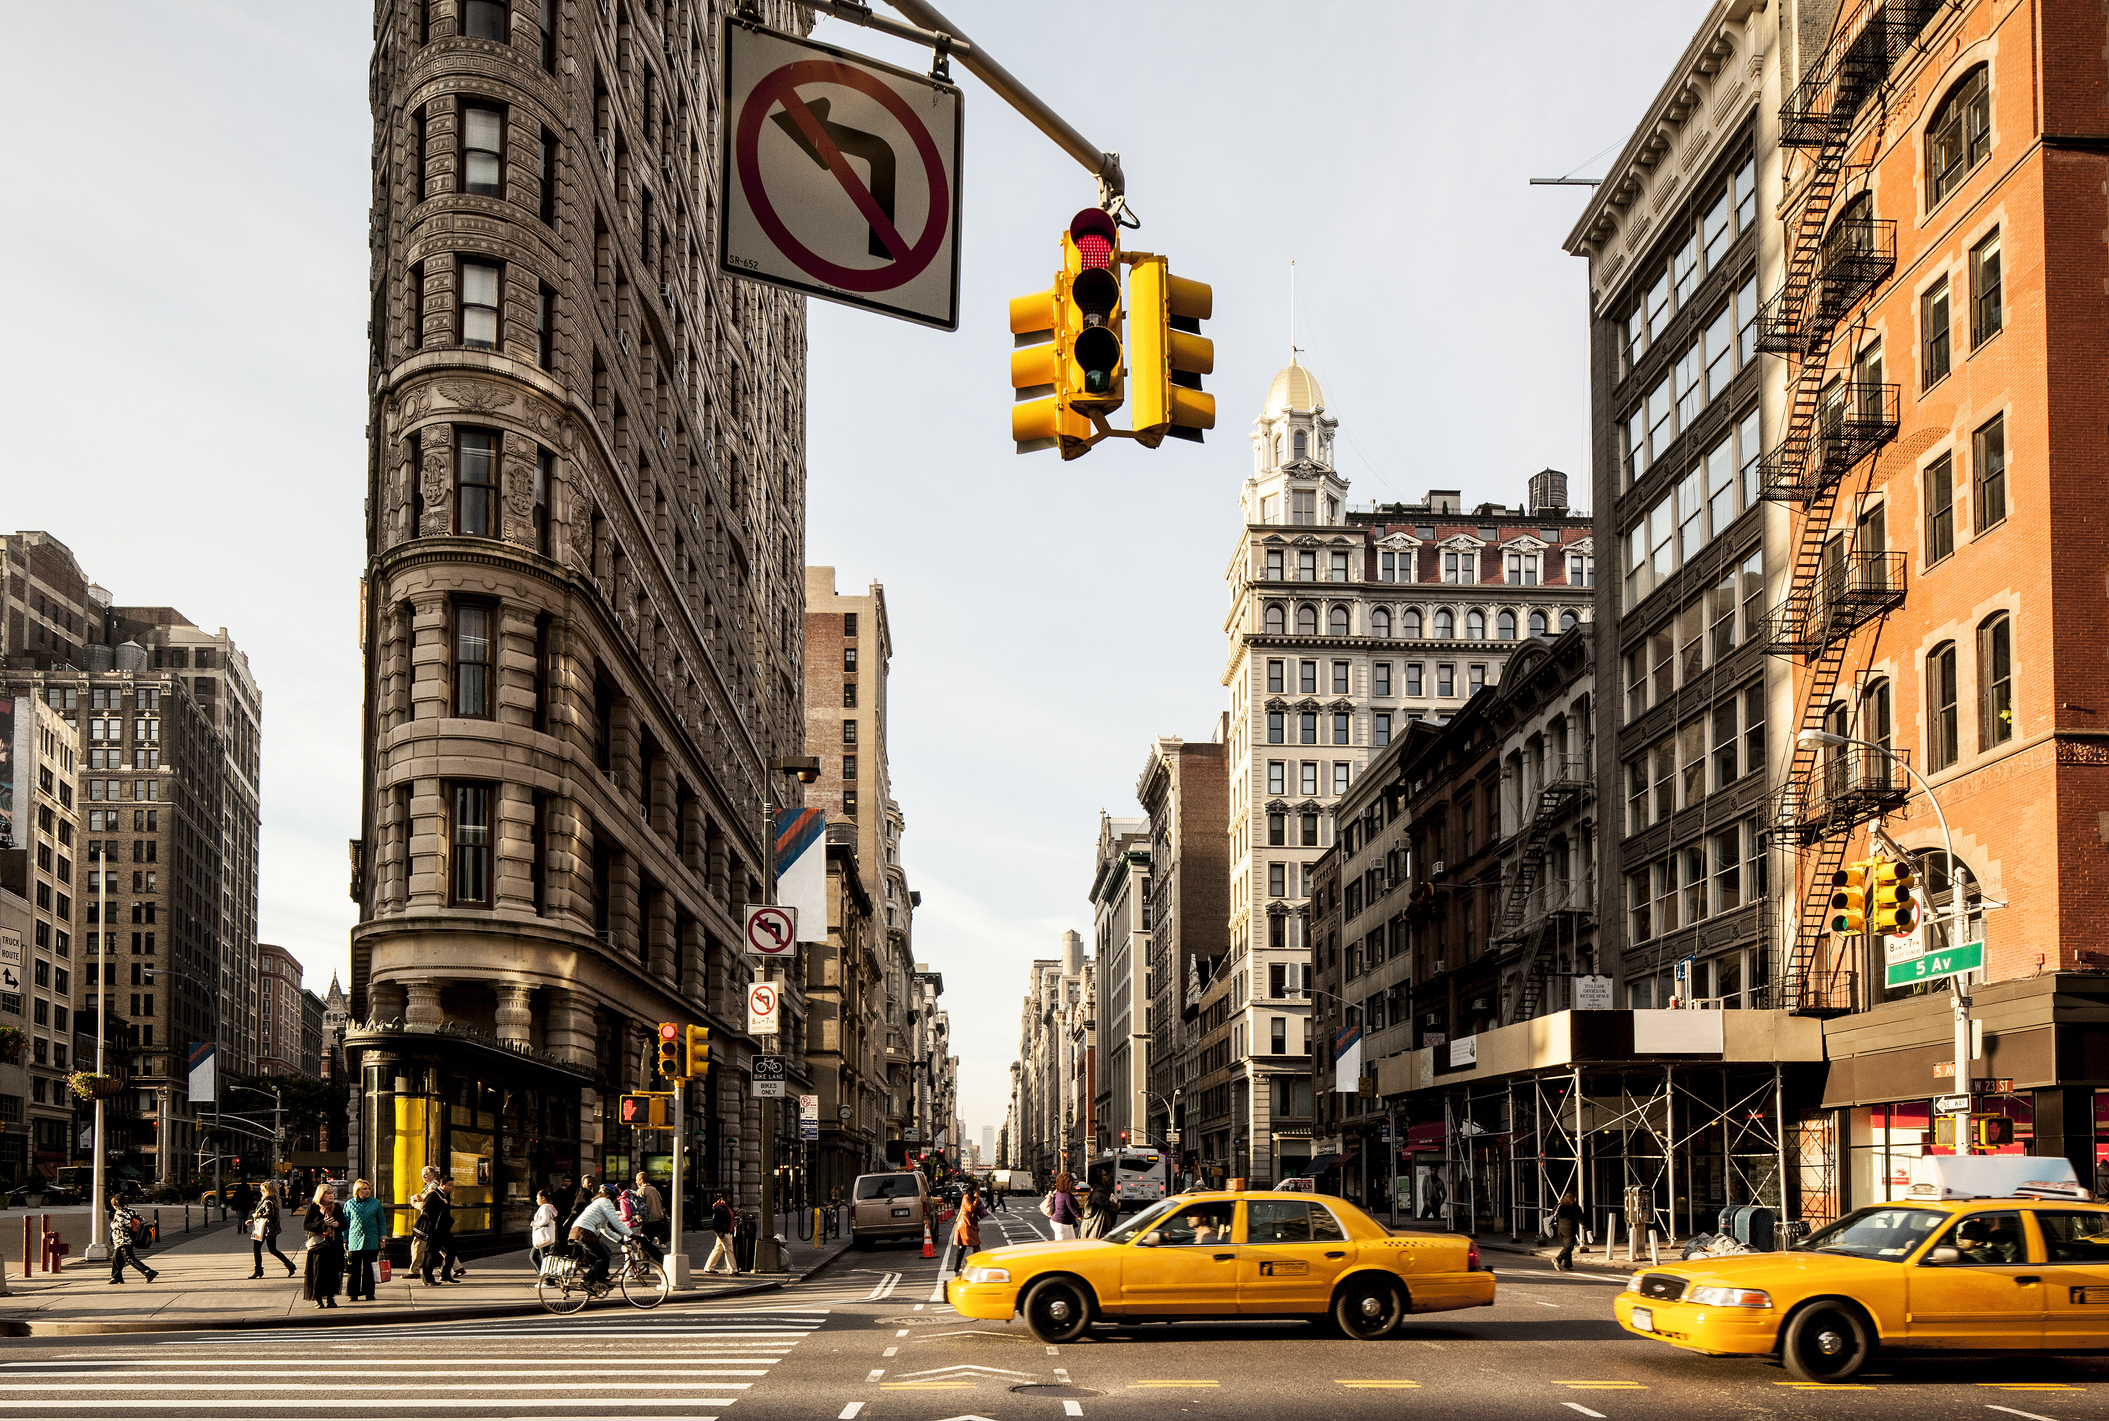 Flatiron Building with traffic lights and yellow cabs at an intersection in New York City